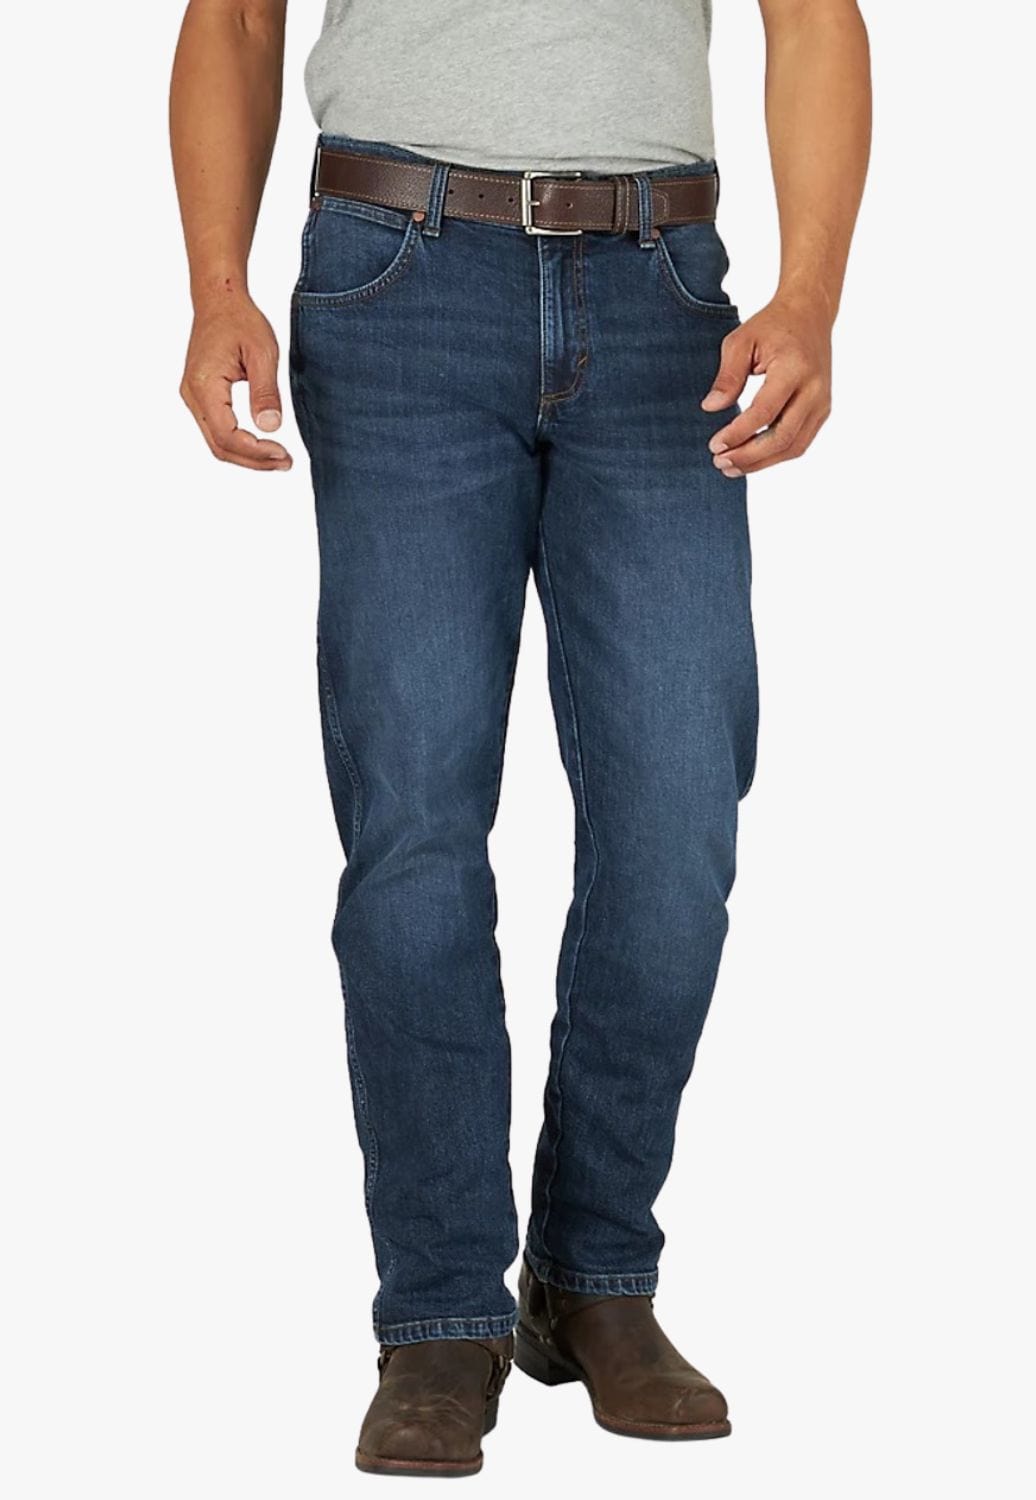 Men's Western & Country Jeans Tagged 